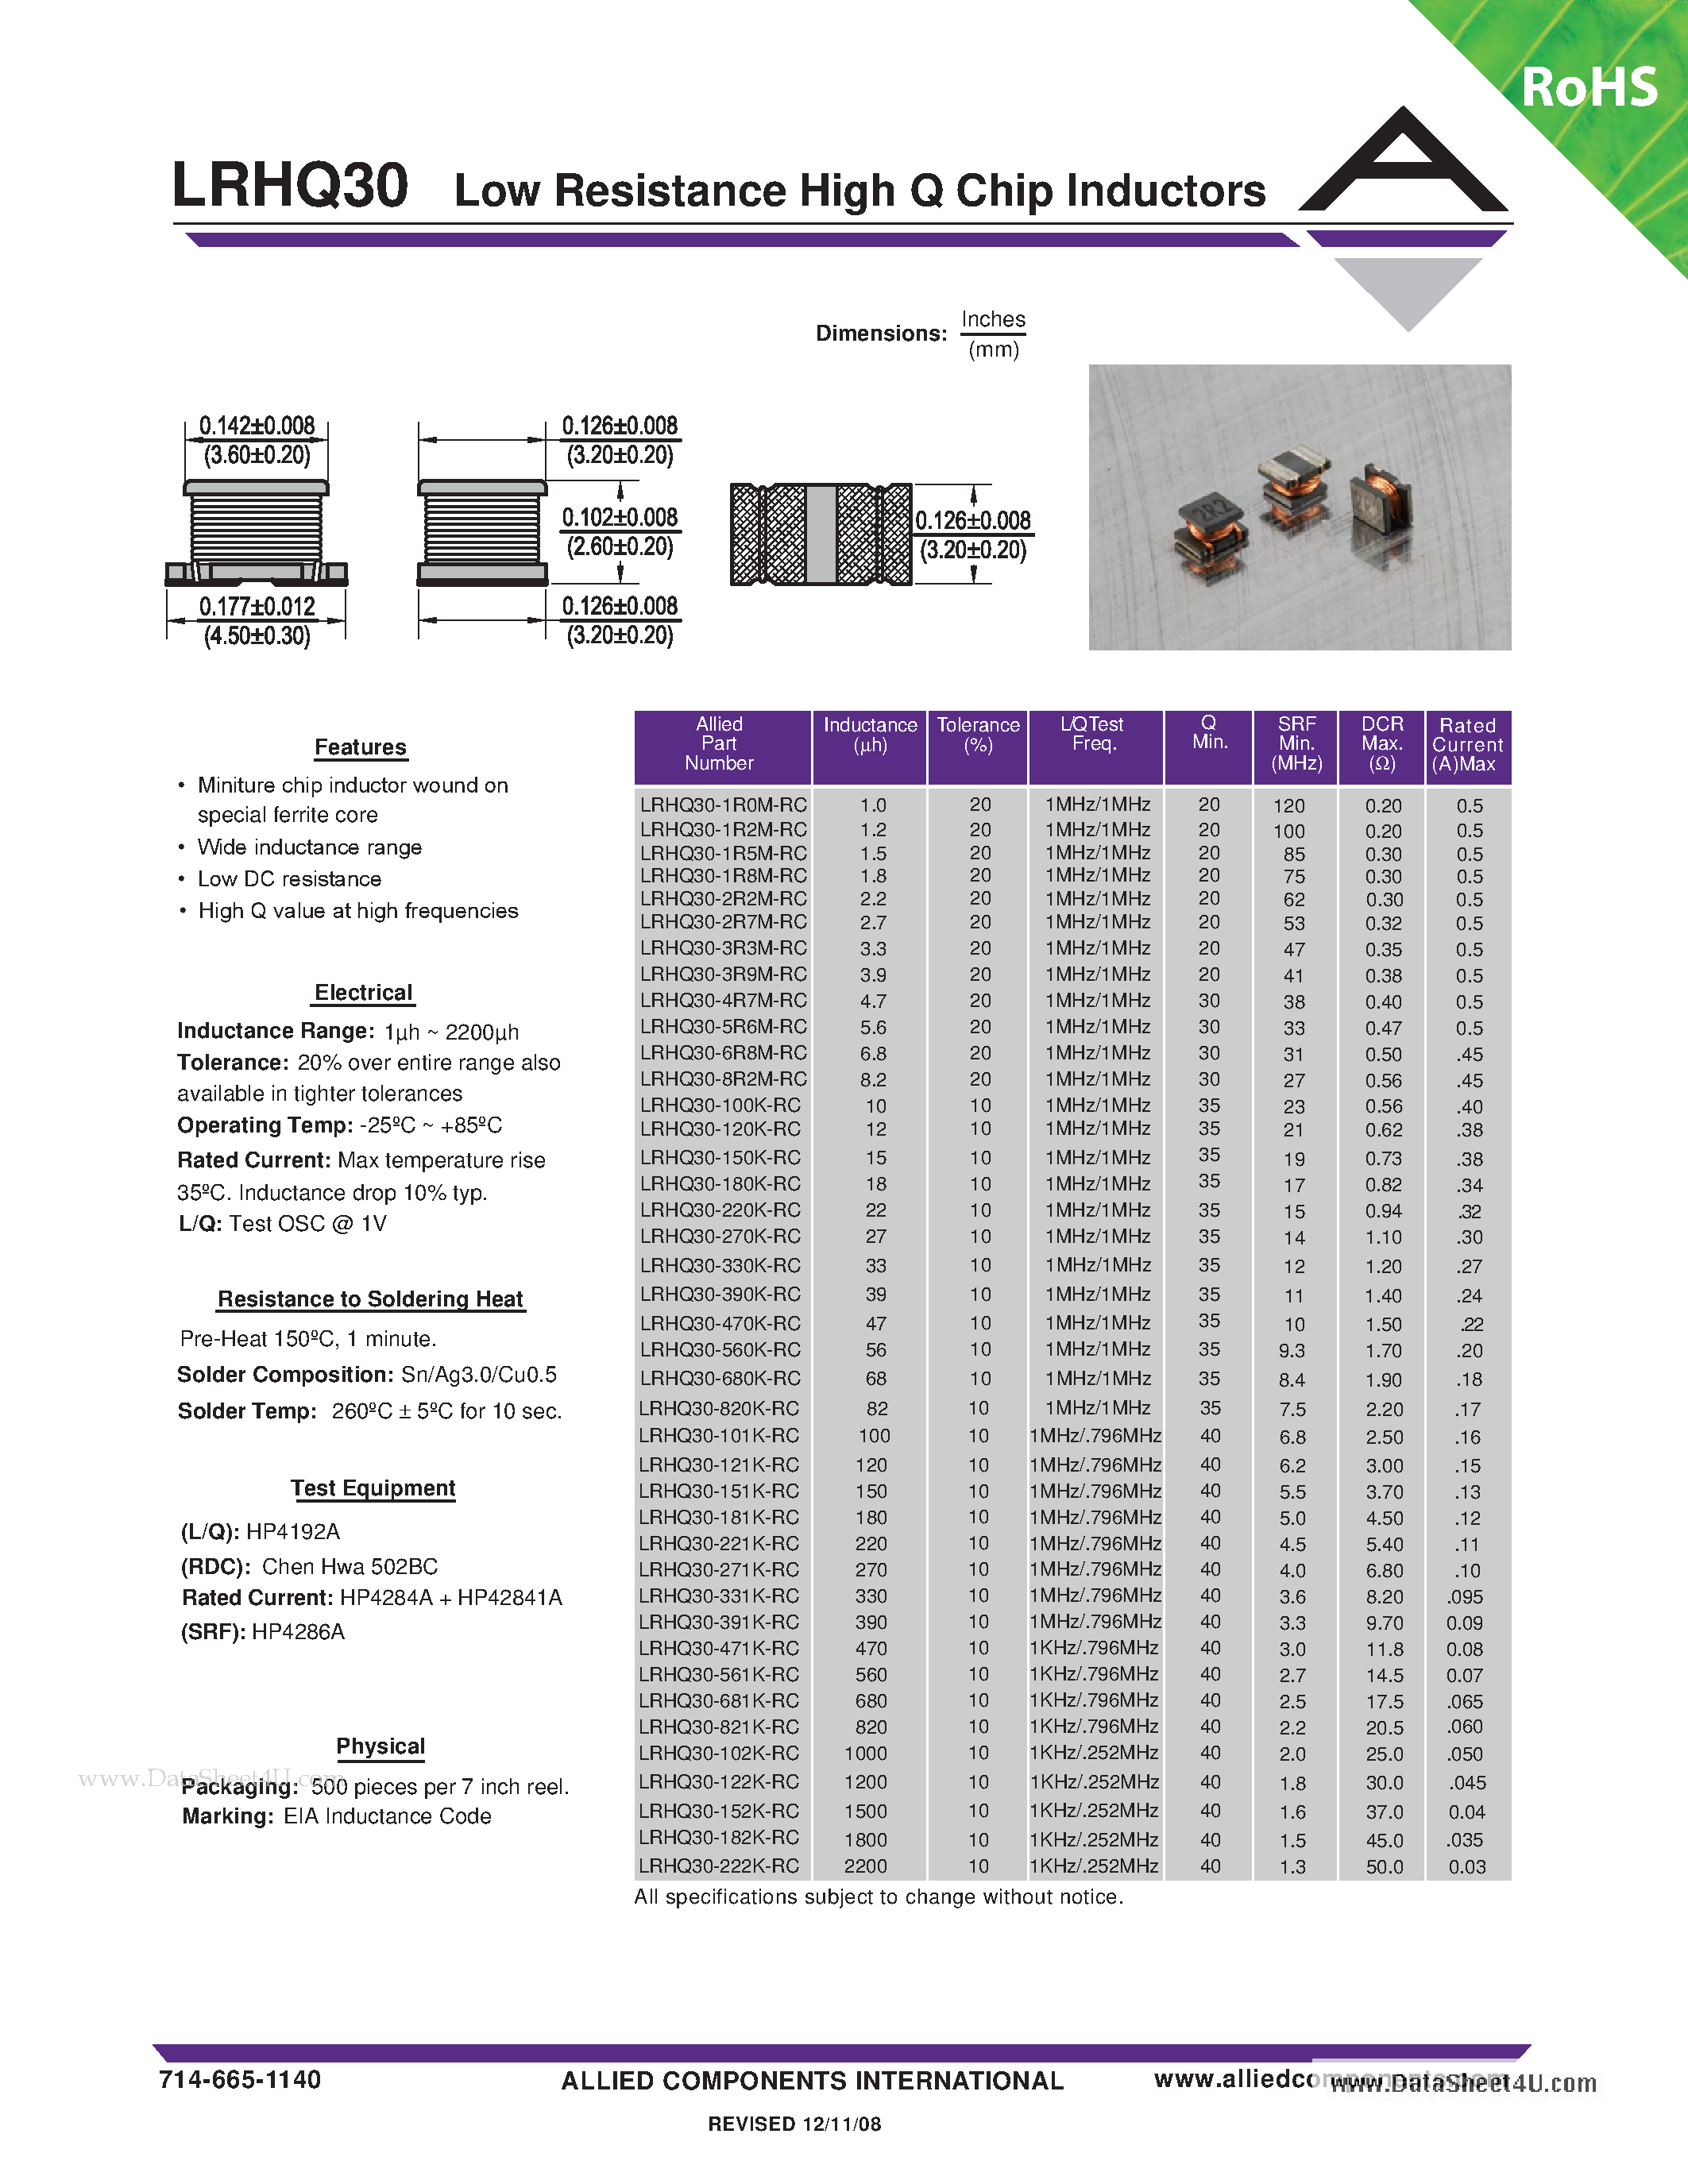 Datasheet LRHQ30 - Low Resistance High Q Chip Inductors page 1